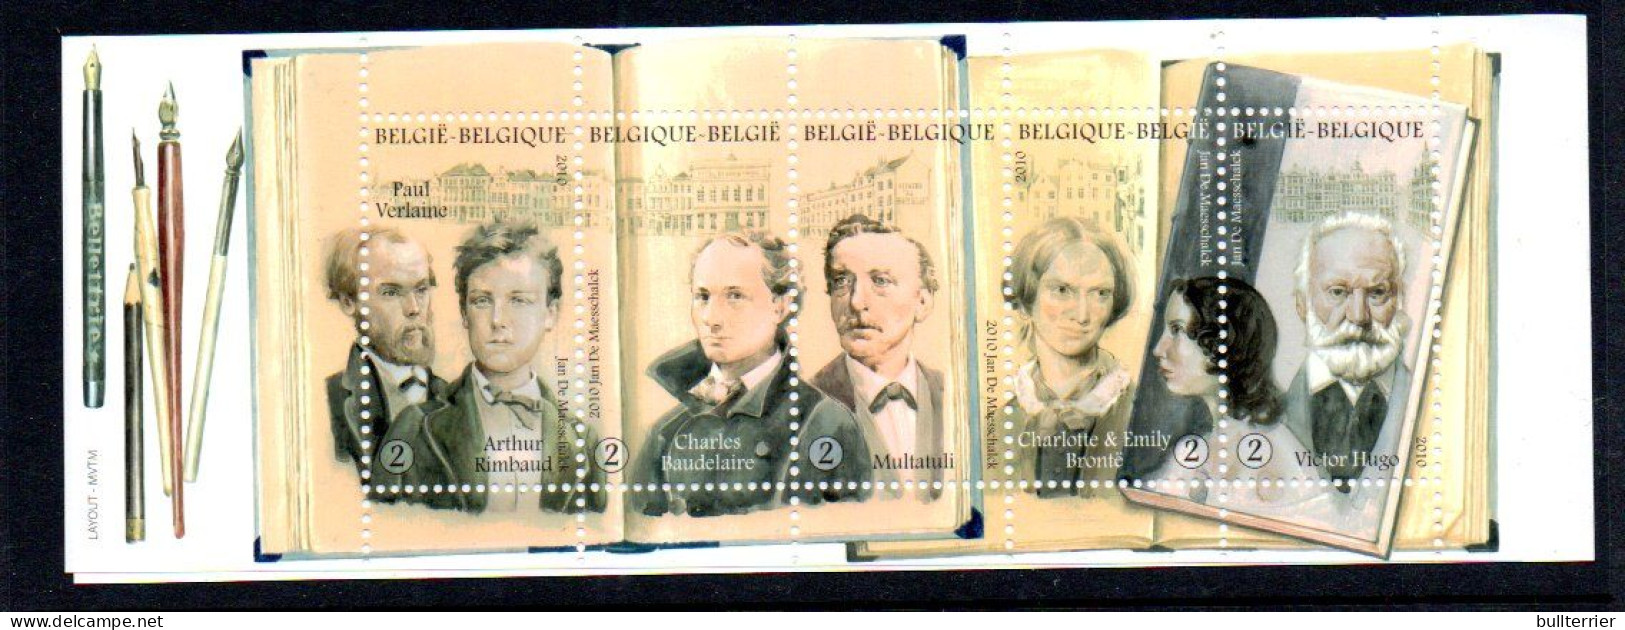 BELGIUM - 2010  - WRITERS BOOKLET COMPLETE MINT NEVER HINGED  , SG CAT £38 - Unused Stamps